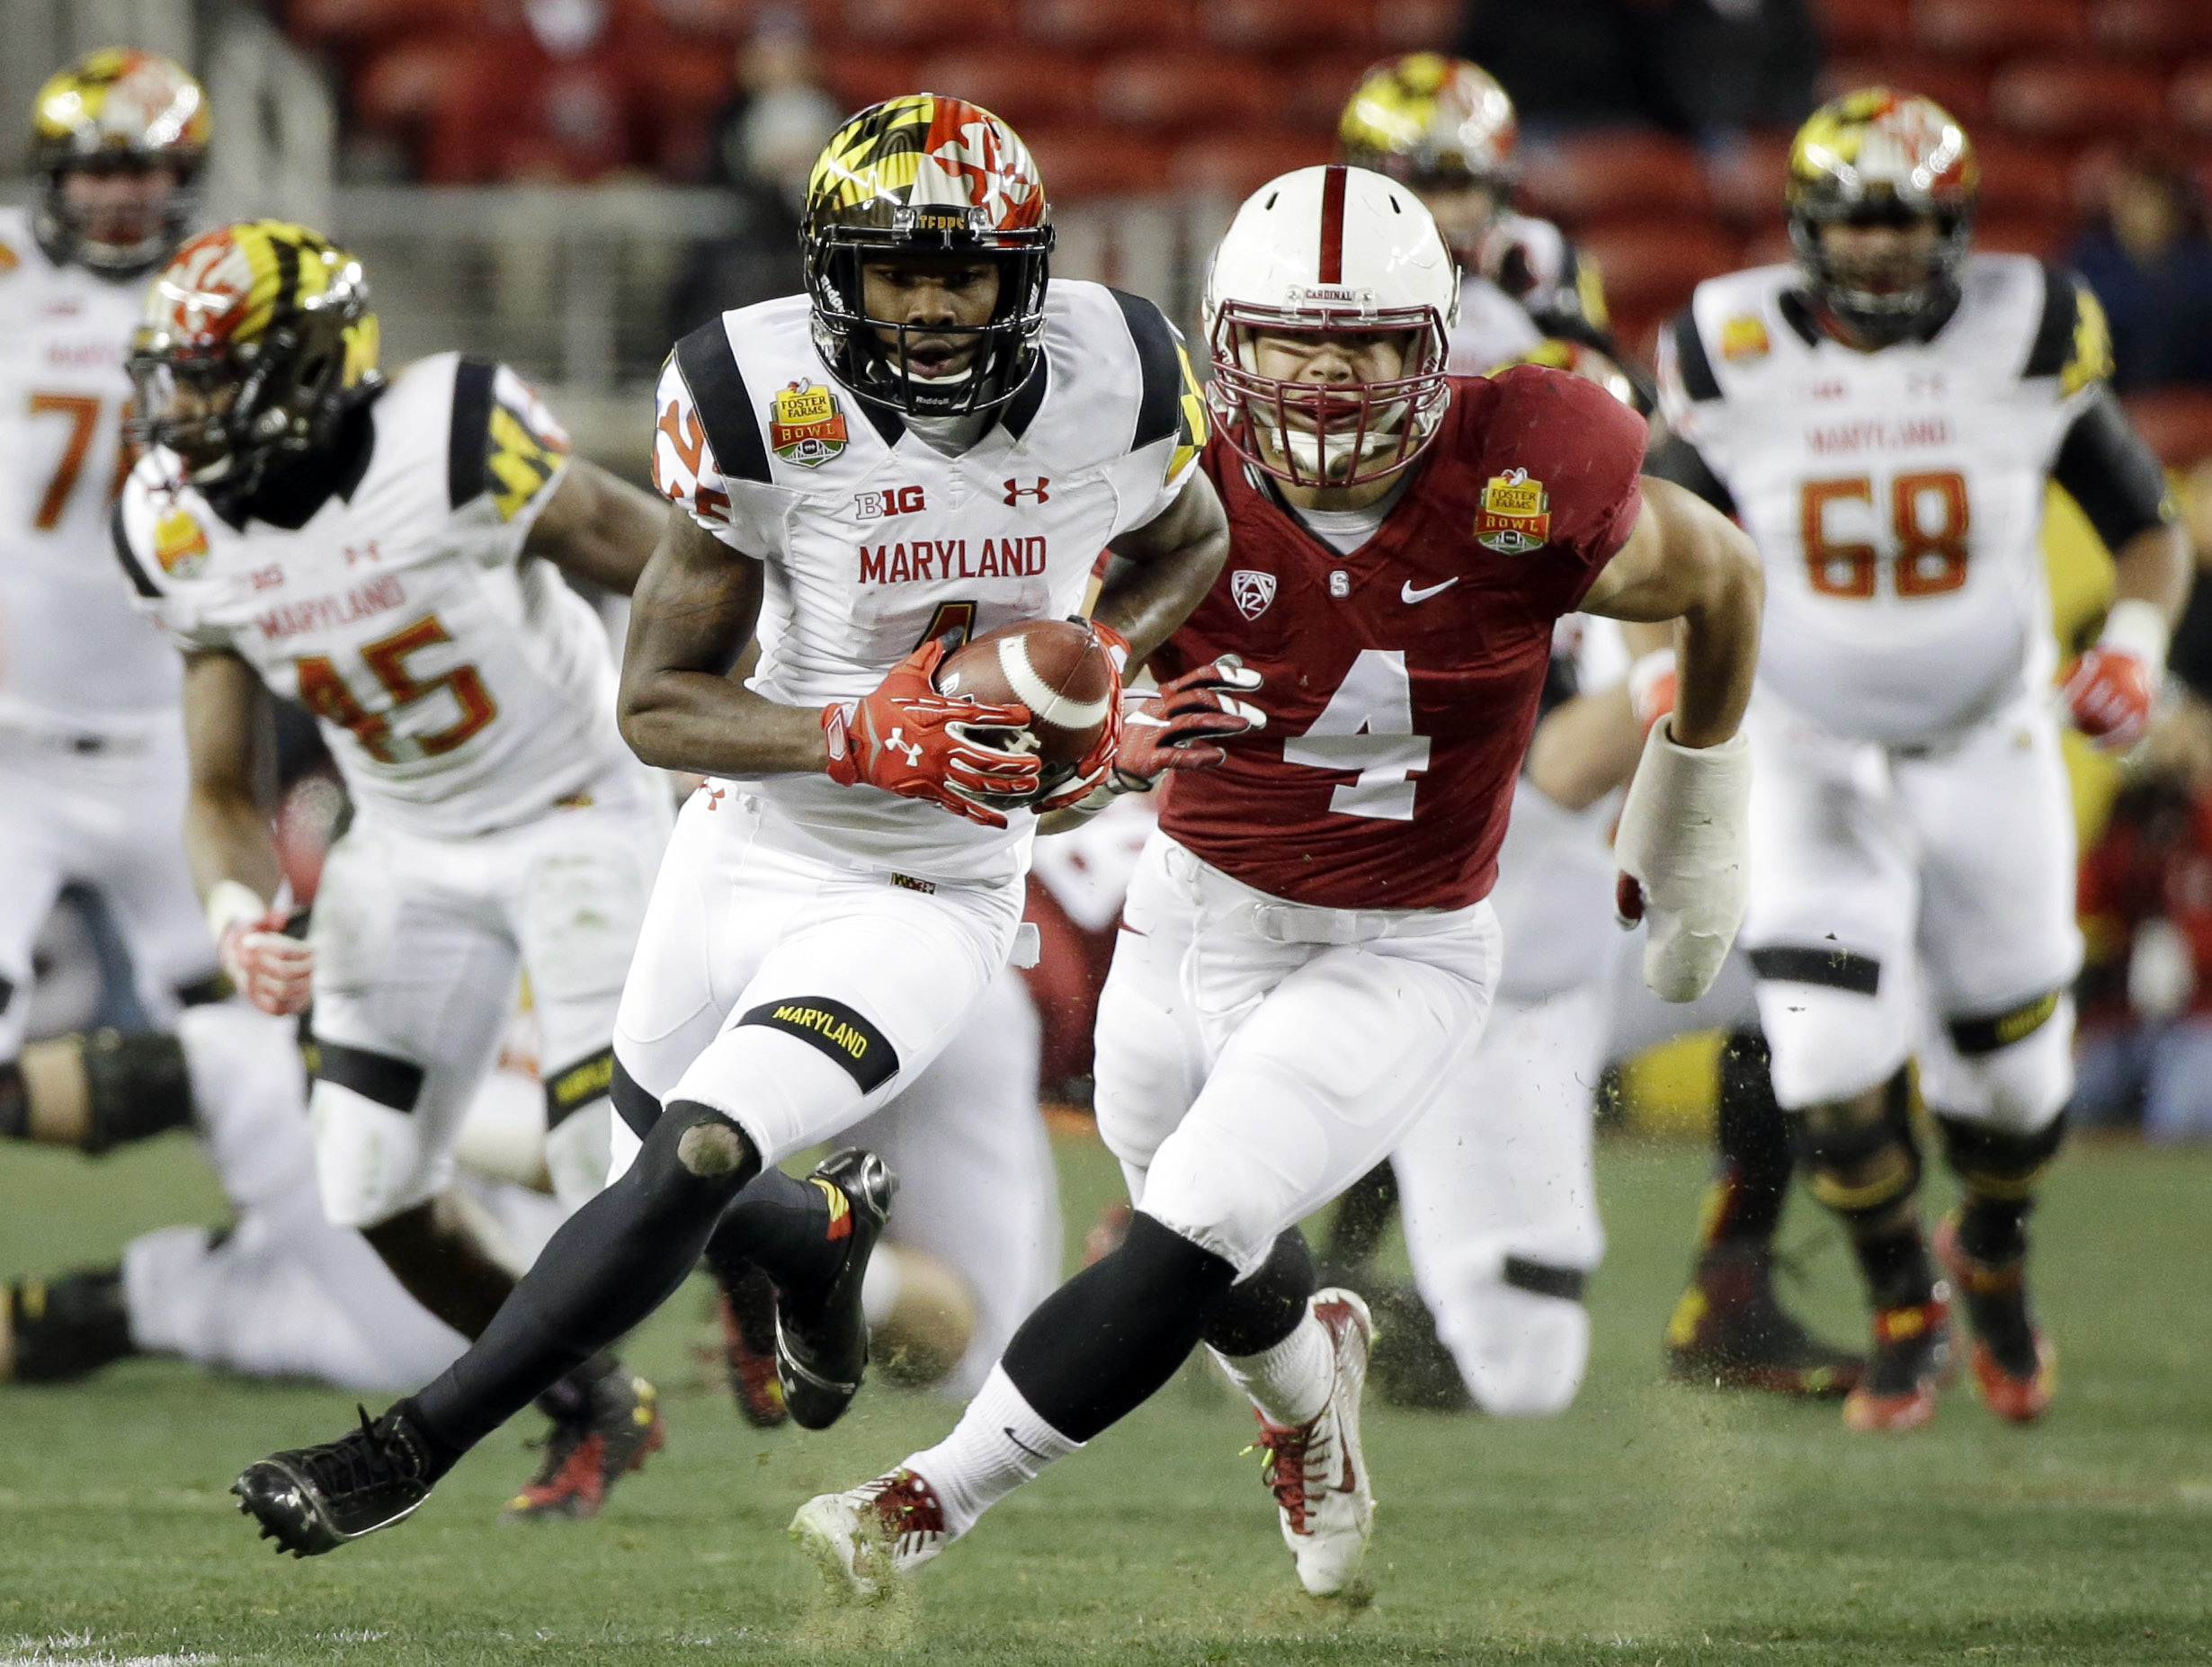 Maryland wide receiver Stefon Diggs is chased by Stanford linebacker Blake Martinez after a reception during the first half of the Foster Farms Bowl NCAA college football game Tuesday, Dec. 30, 2014, in Santa Clara, Calif. (AP Photo/Marcio Jose Sanchez)